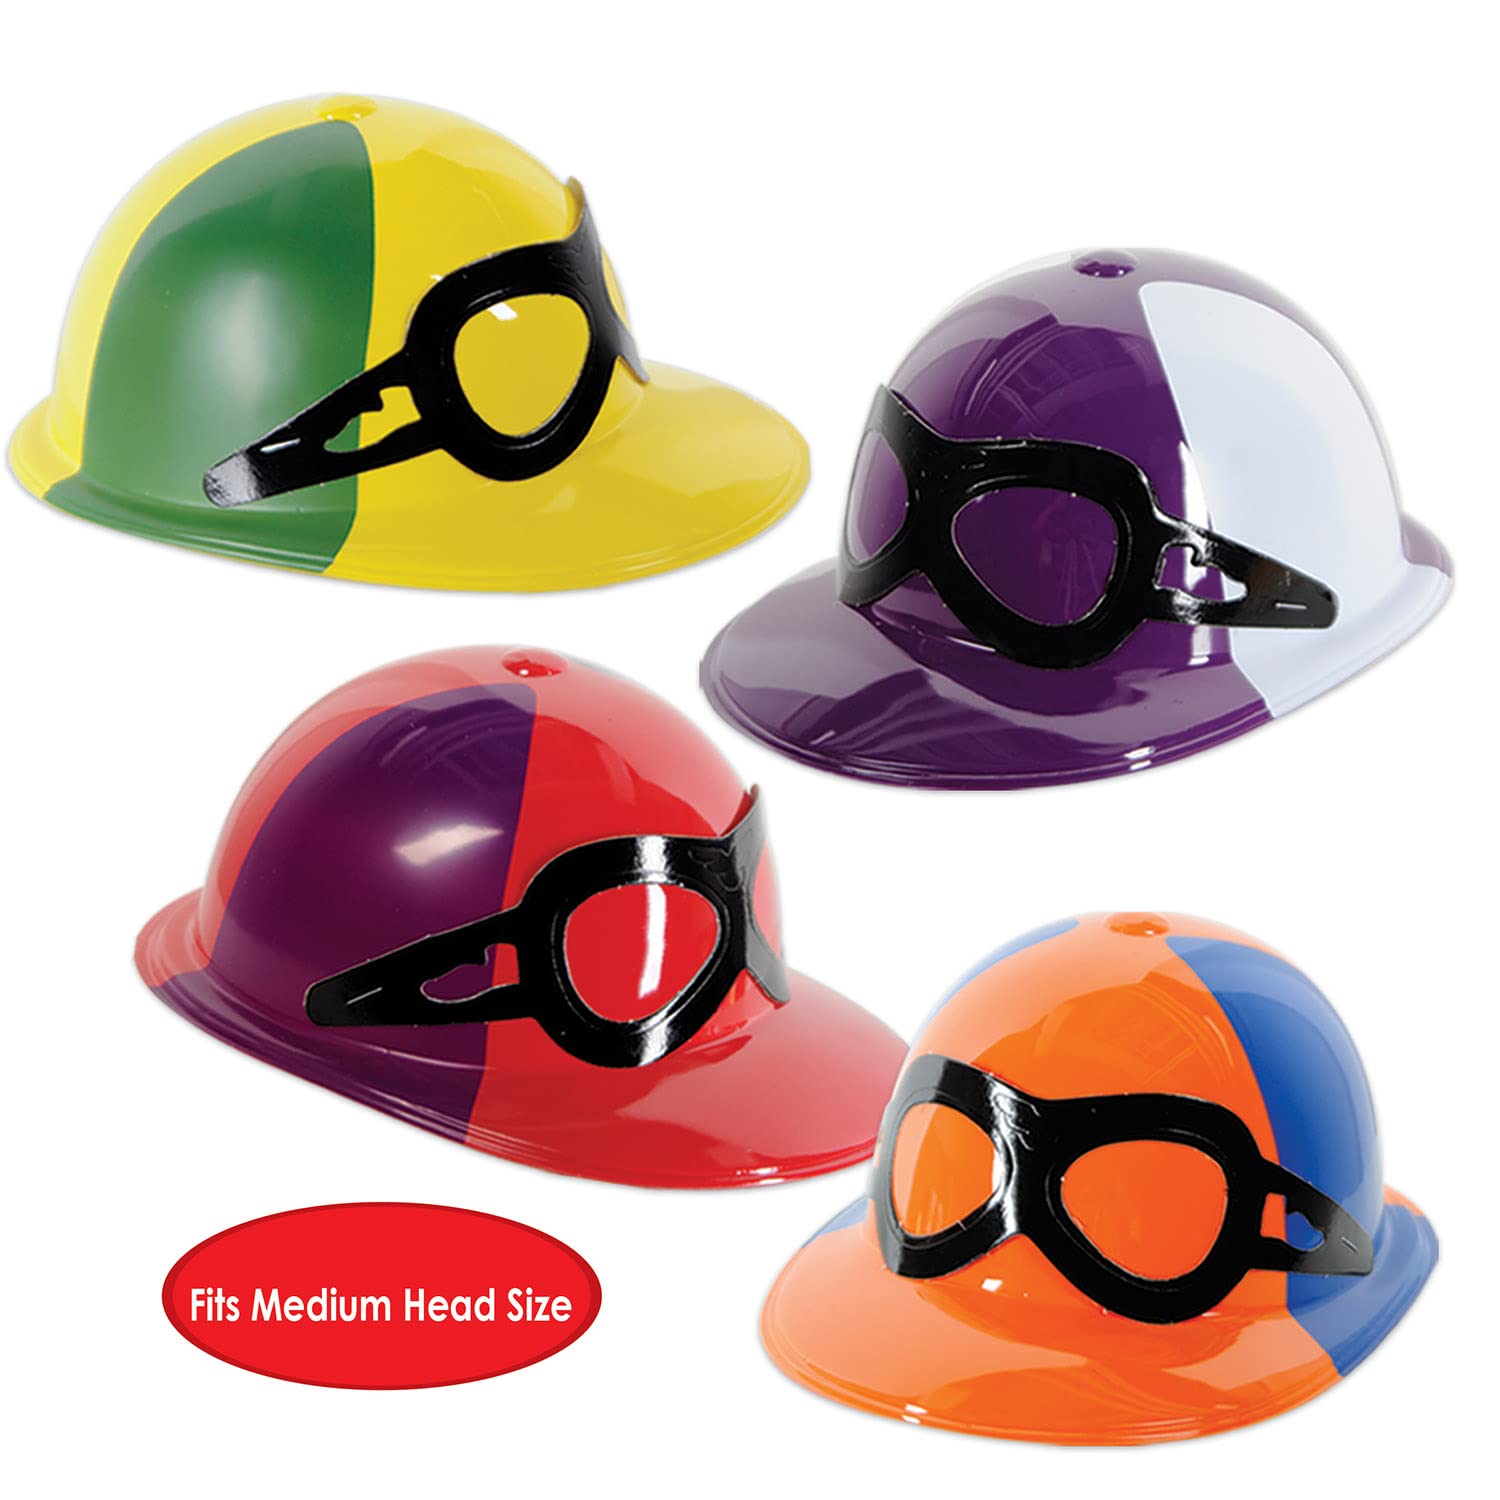 Beistle 12 Piece Assorted Color Novelty Plastic Jockey Helmets For Derby Day Theme Party Decorations